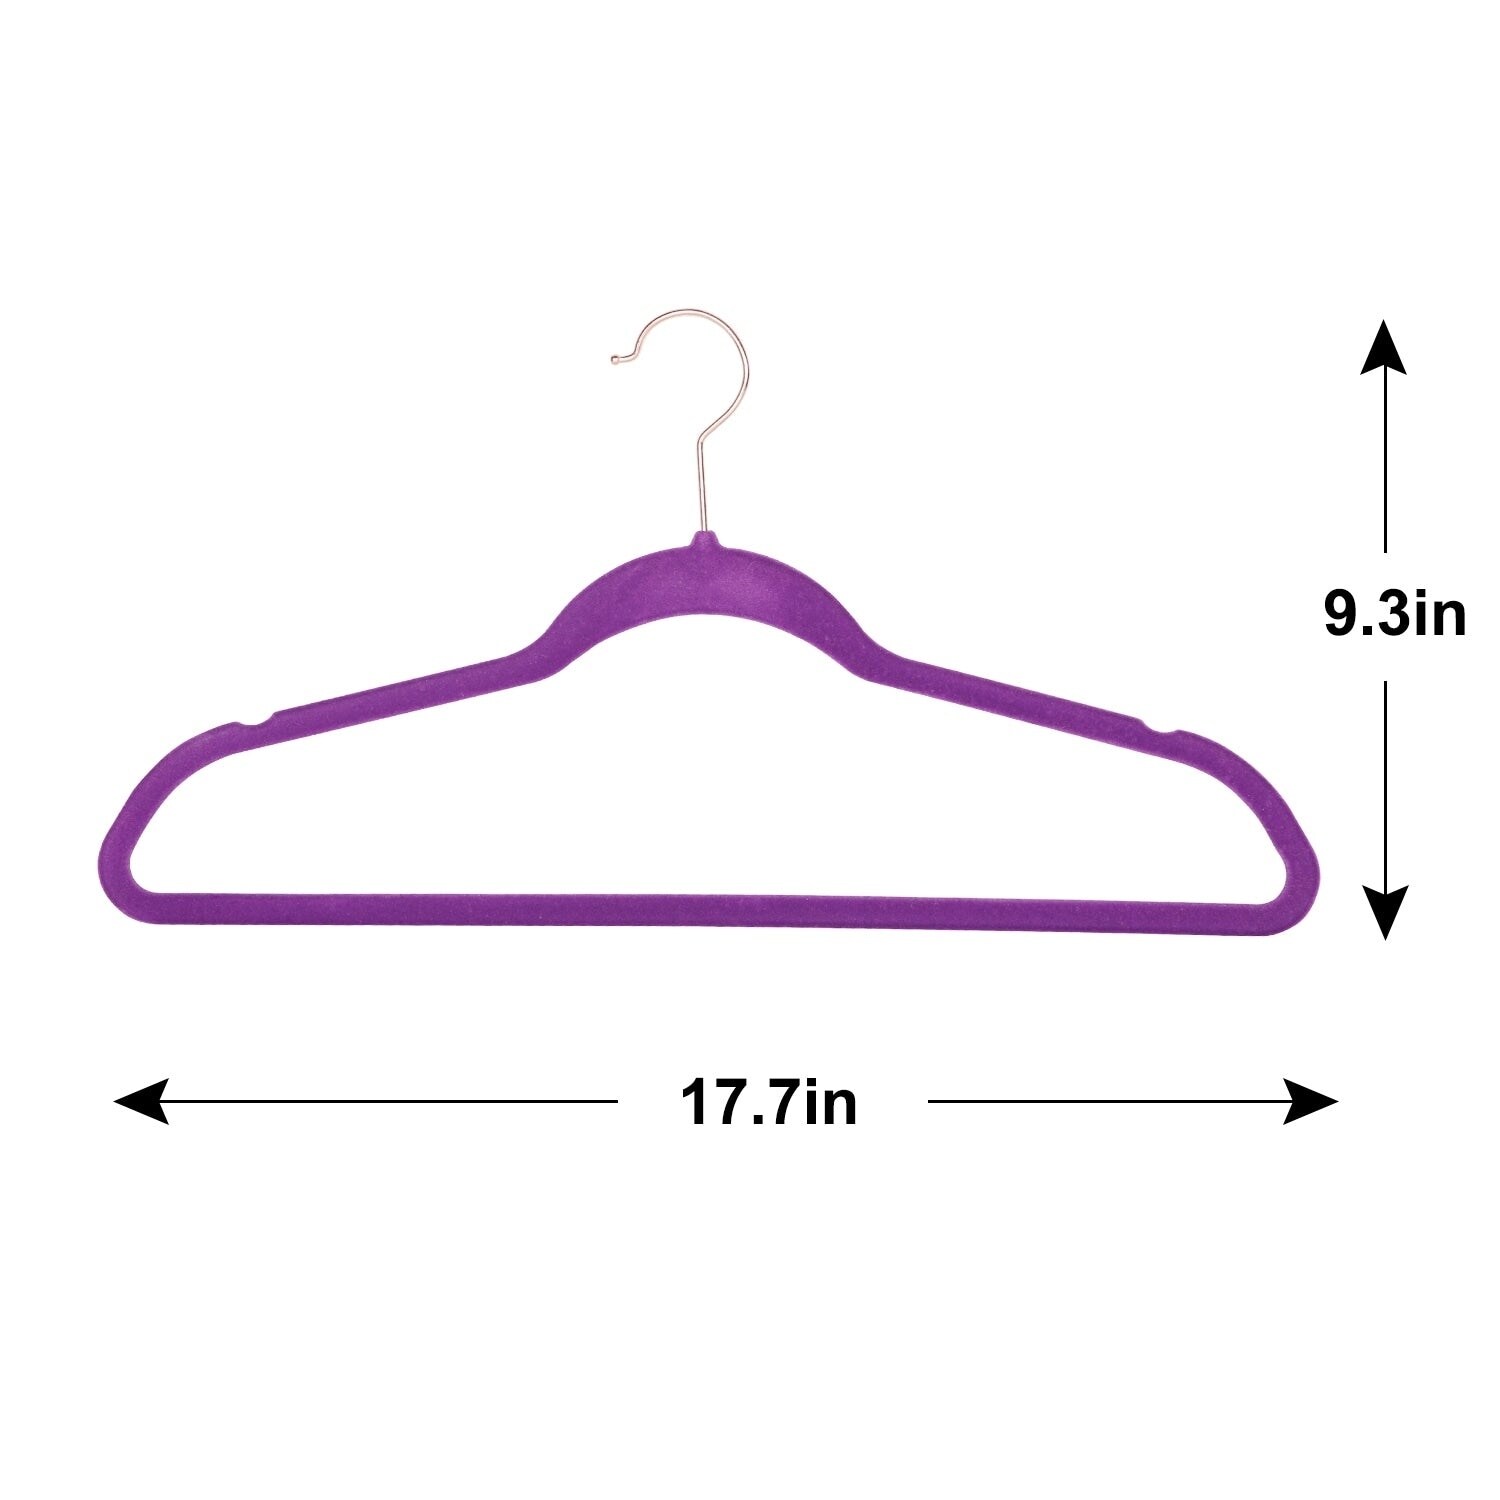 https://ak1.ostkcdn.com/images/products/is/images/direct/ab4c0036c3856b96cee68deeb3ae27225fafefcf/Hanger-Sets-Heavy-Duty-Velvet-Hangers-50-Pack-Non-Slip-%26Ultra-Thin%2C-Six-Colors-Option.jpg